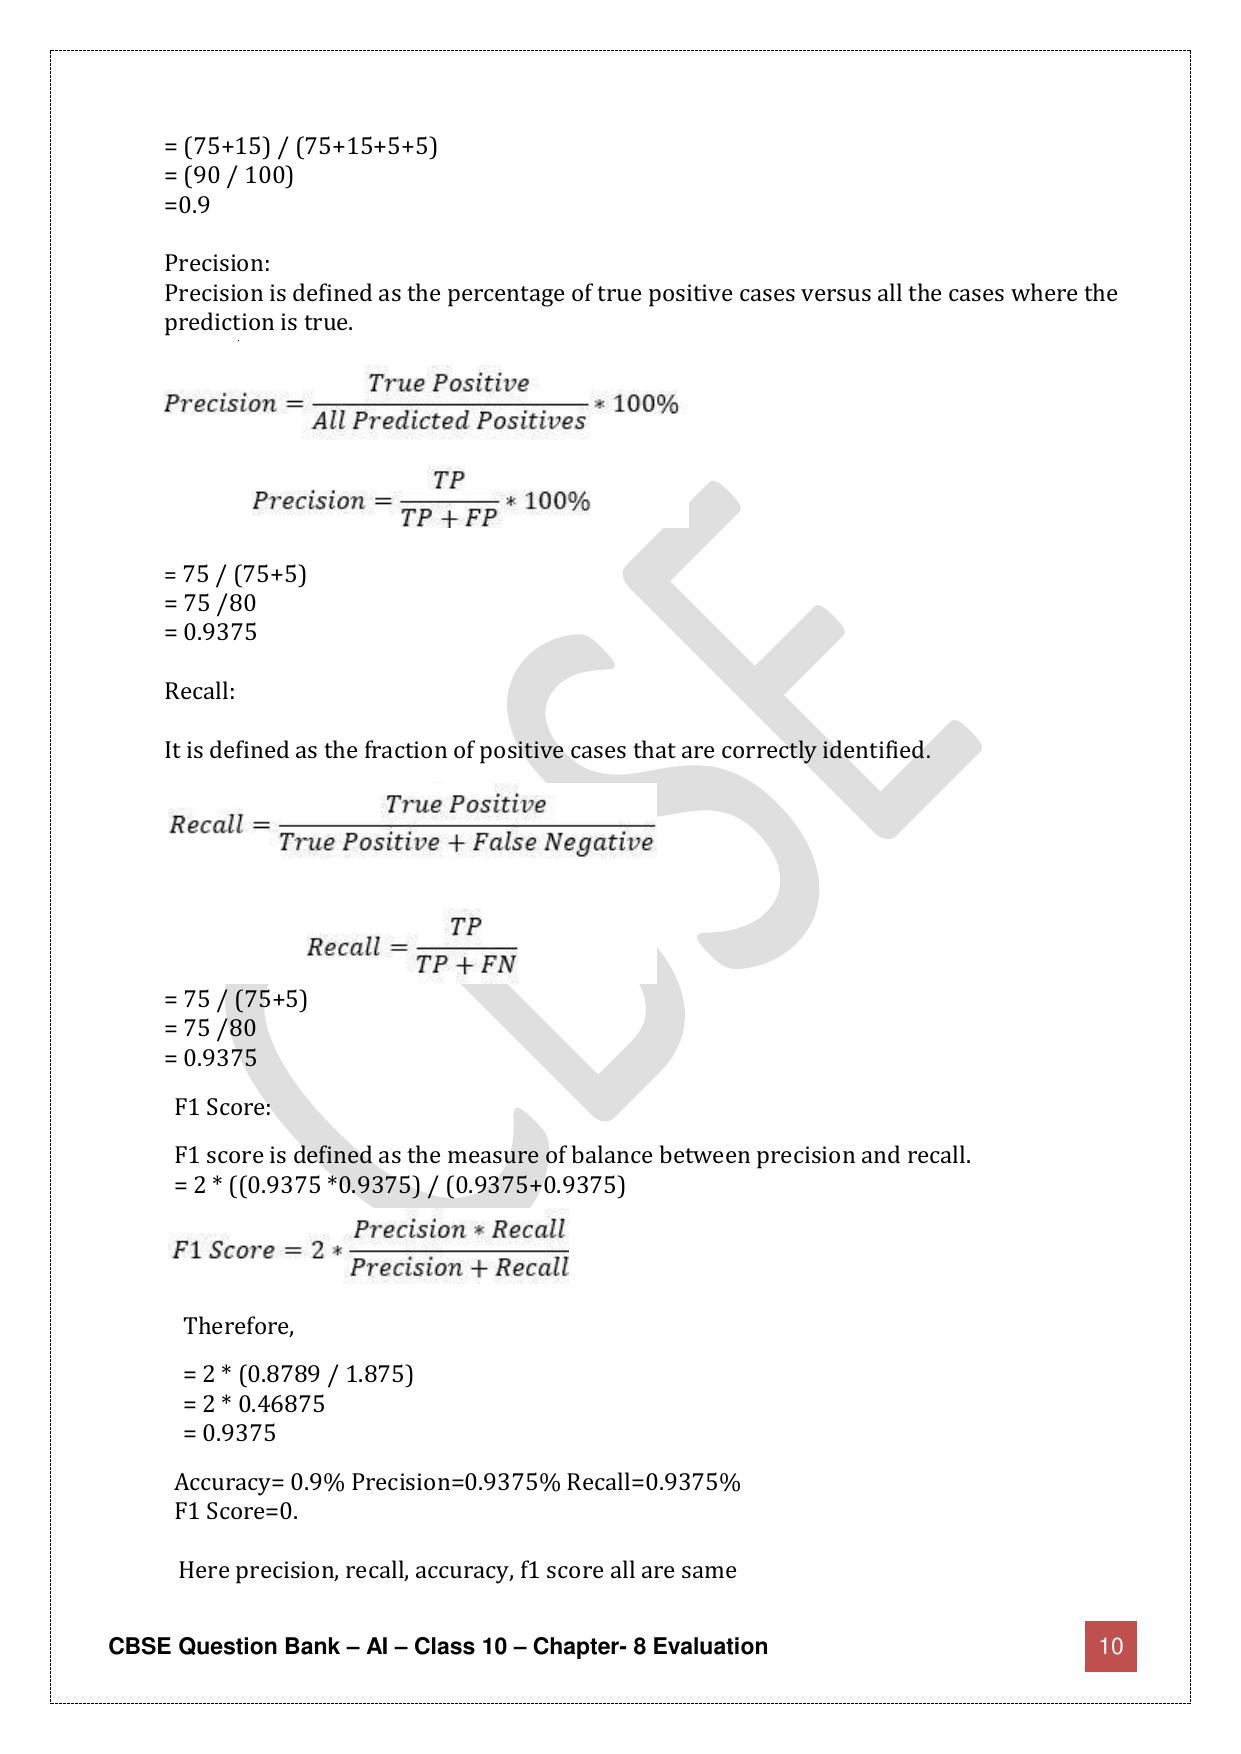 CBSE Class 10 Artificial Intelligence - Chapter 8 Question Bank - Page 10